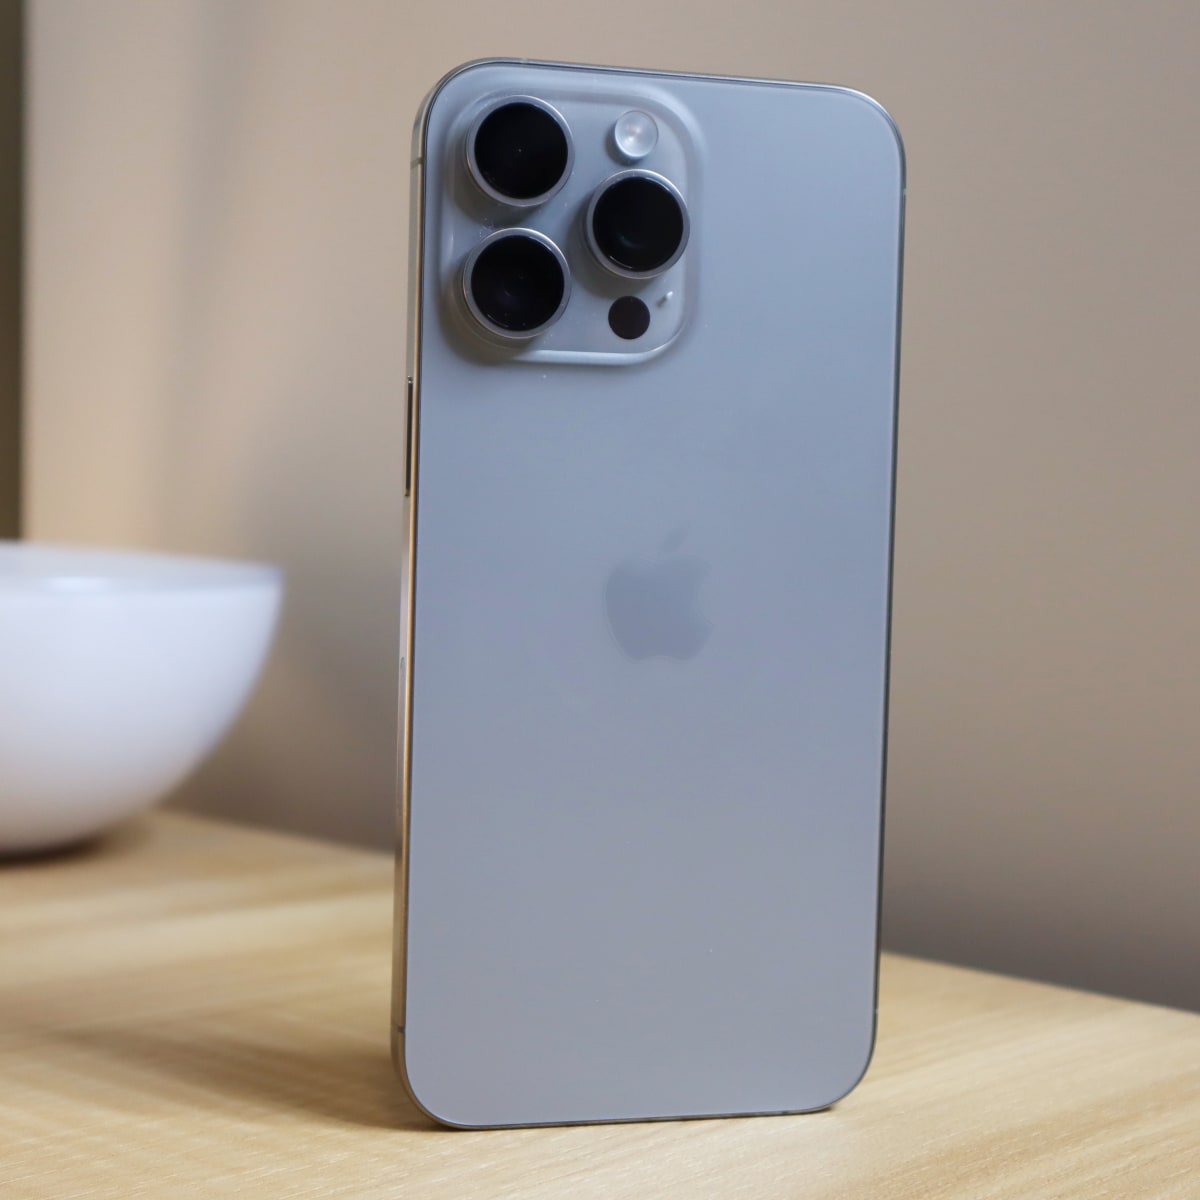 iPhone 15 Pro and 15 Pro Max review: Serious camera upgrades - TheStreet